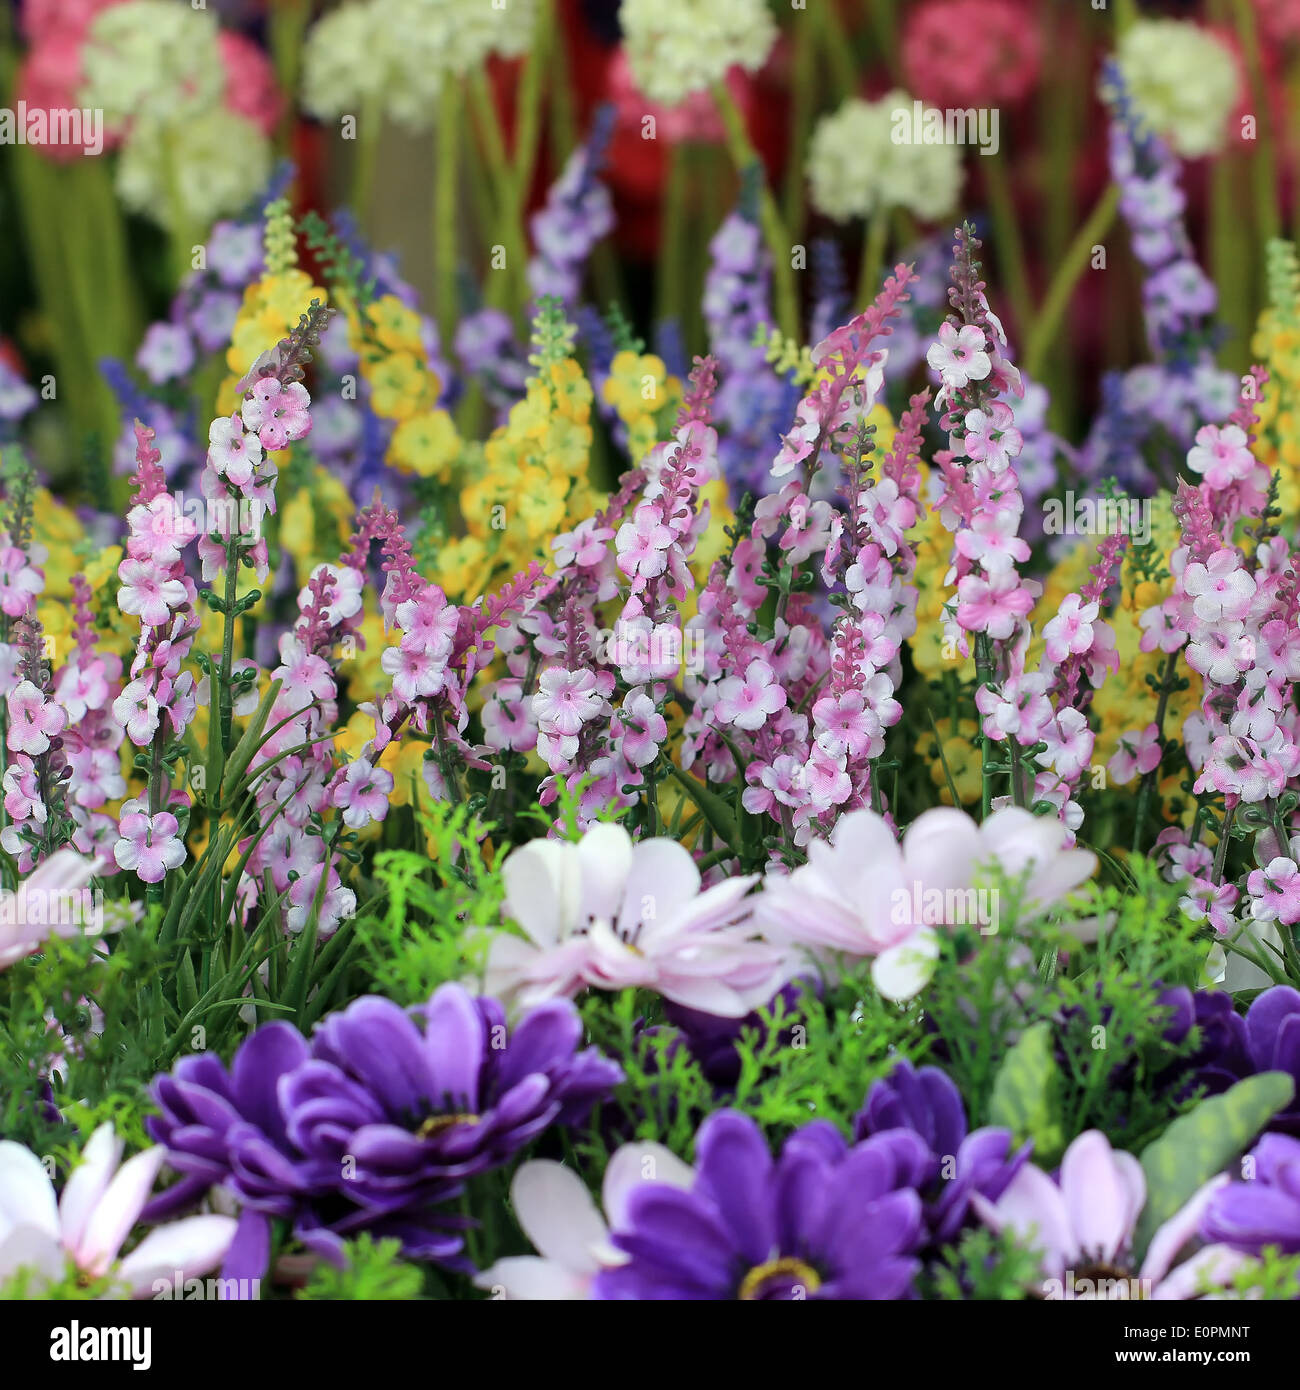 colorful of decoration artificial flower Stock Photo